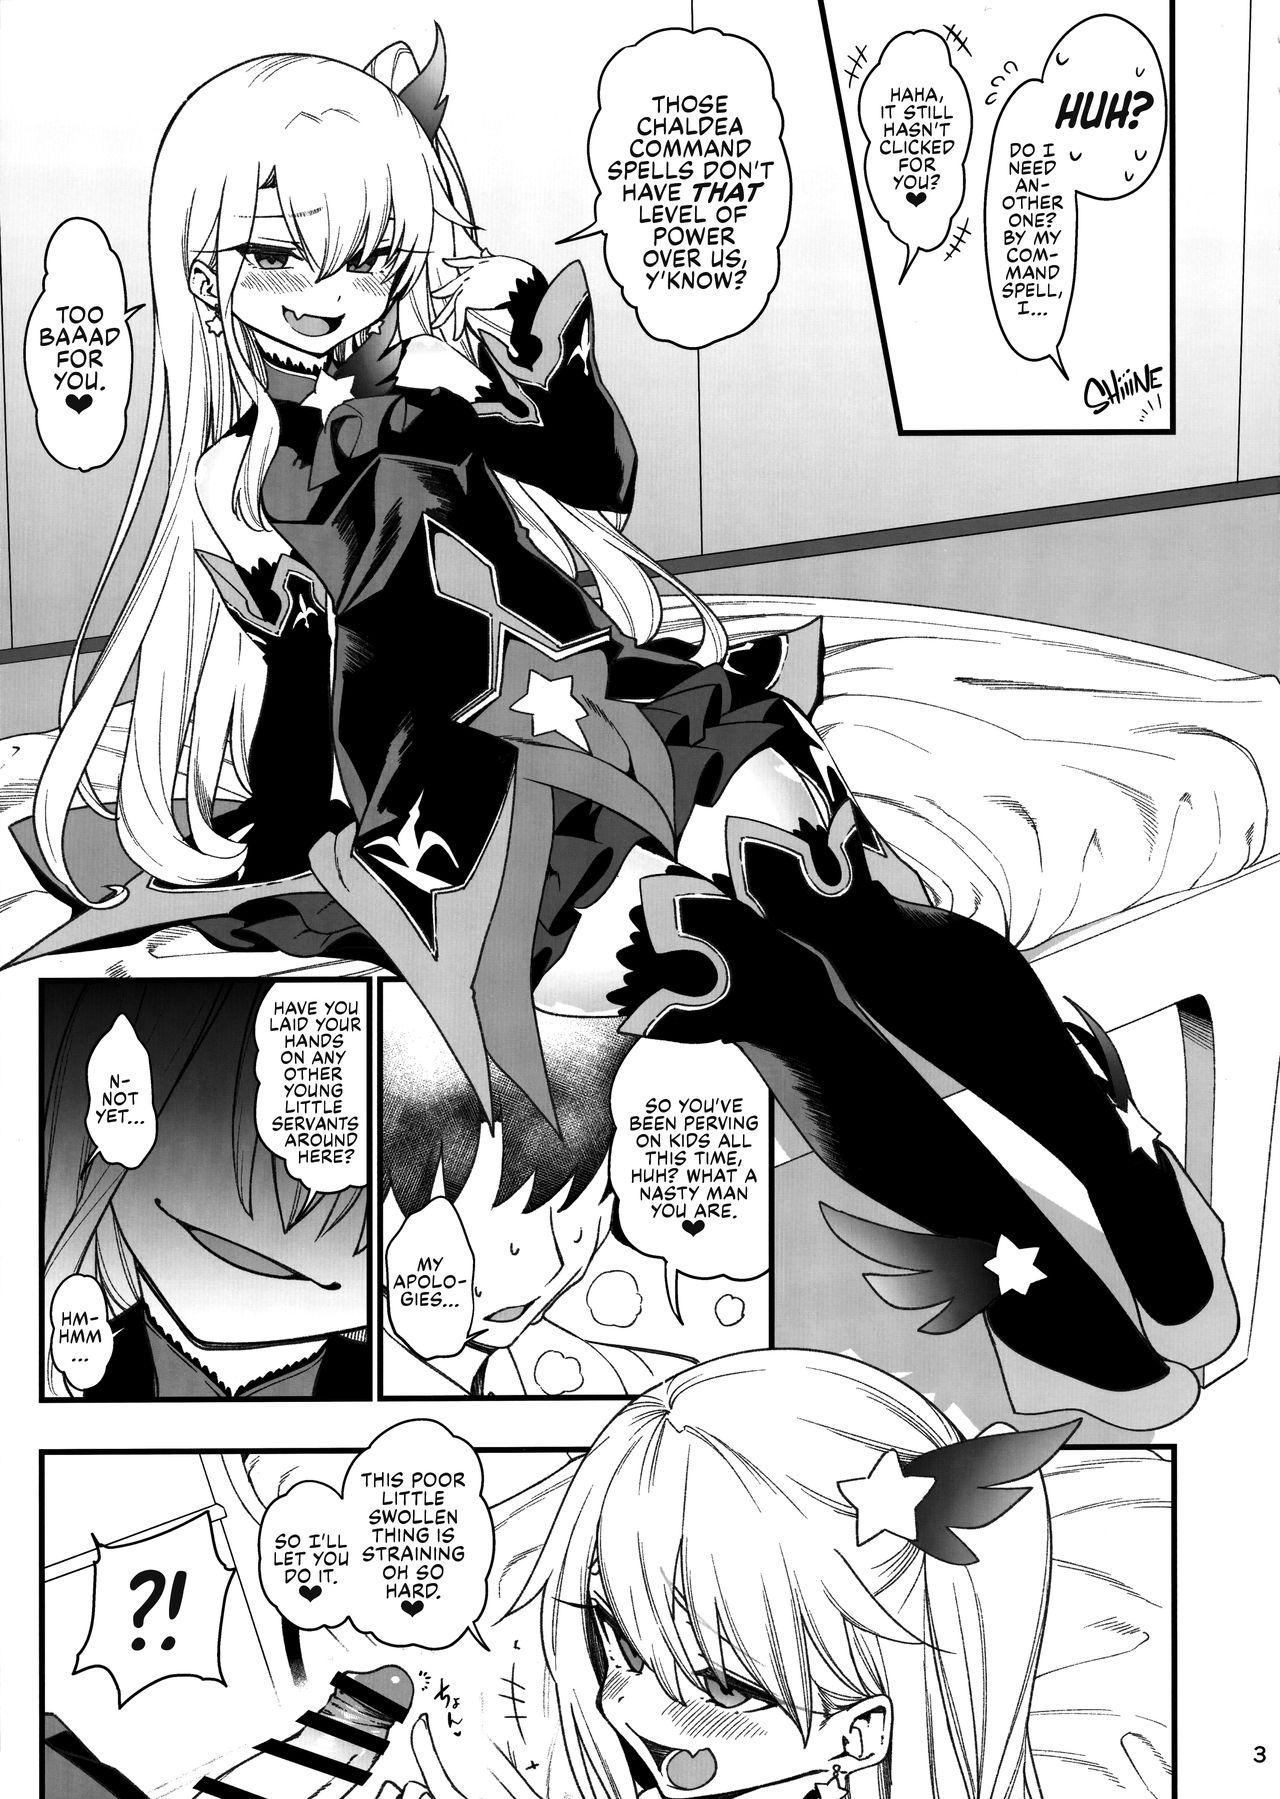 Argentina Mesugaki Testament Form-chan o Wakarasetai | That Slutty Little Testament Form Brat! I Want to Teach Her a Lesson! - Fate grand order Babe - Page 4